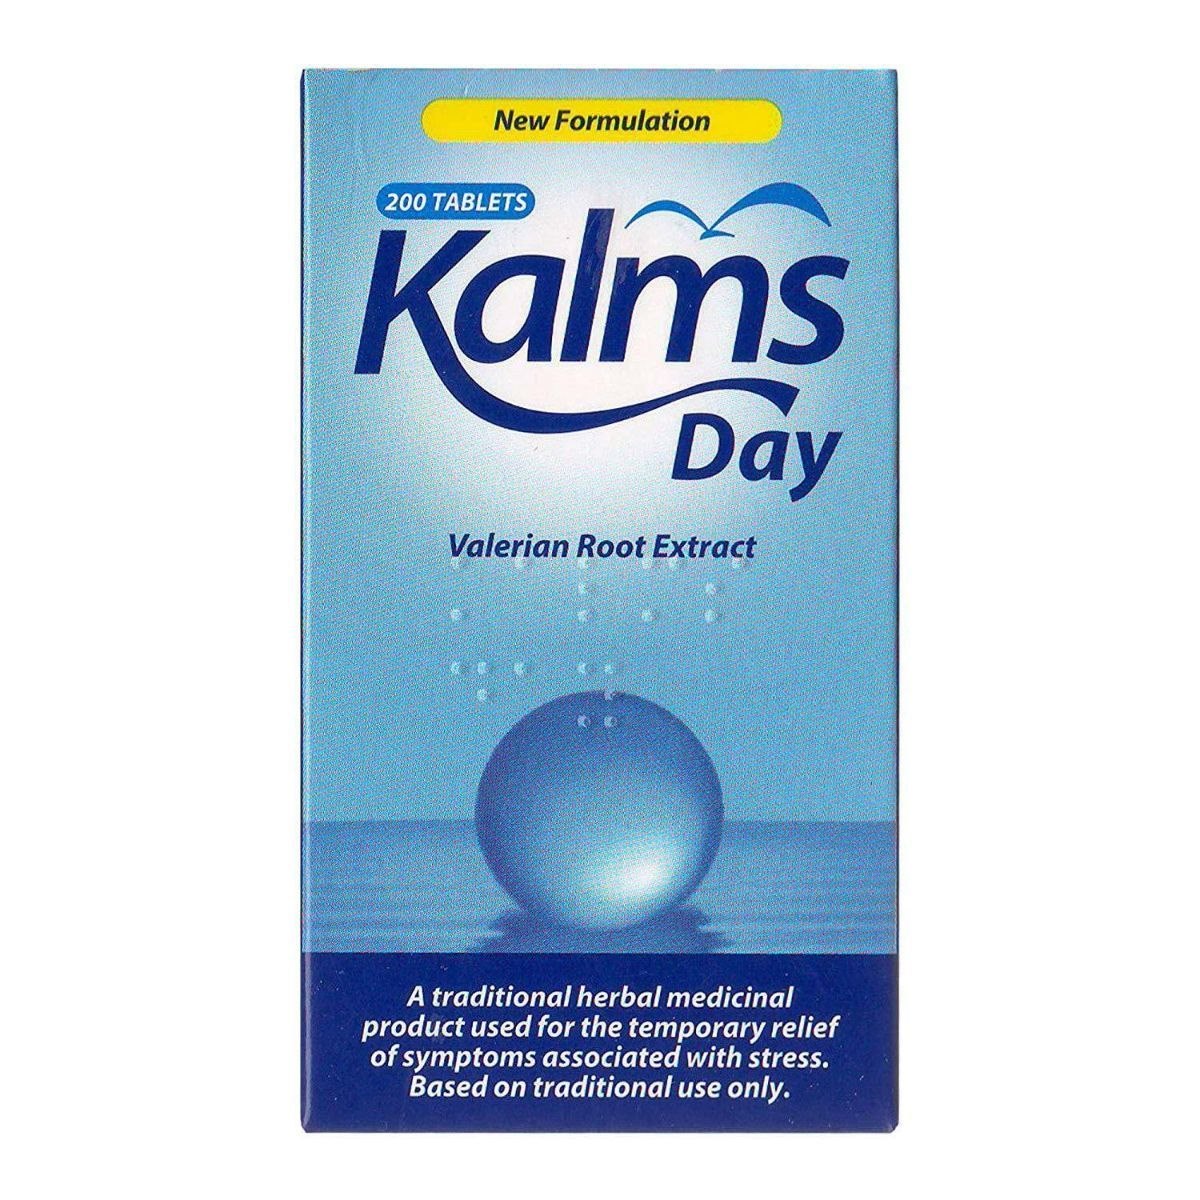 Kalms Day Valerian Root Extract 200 Tablets